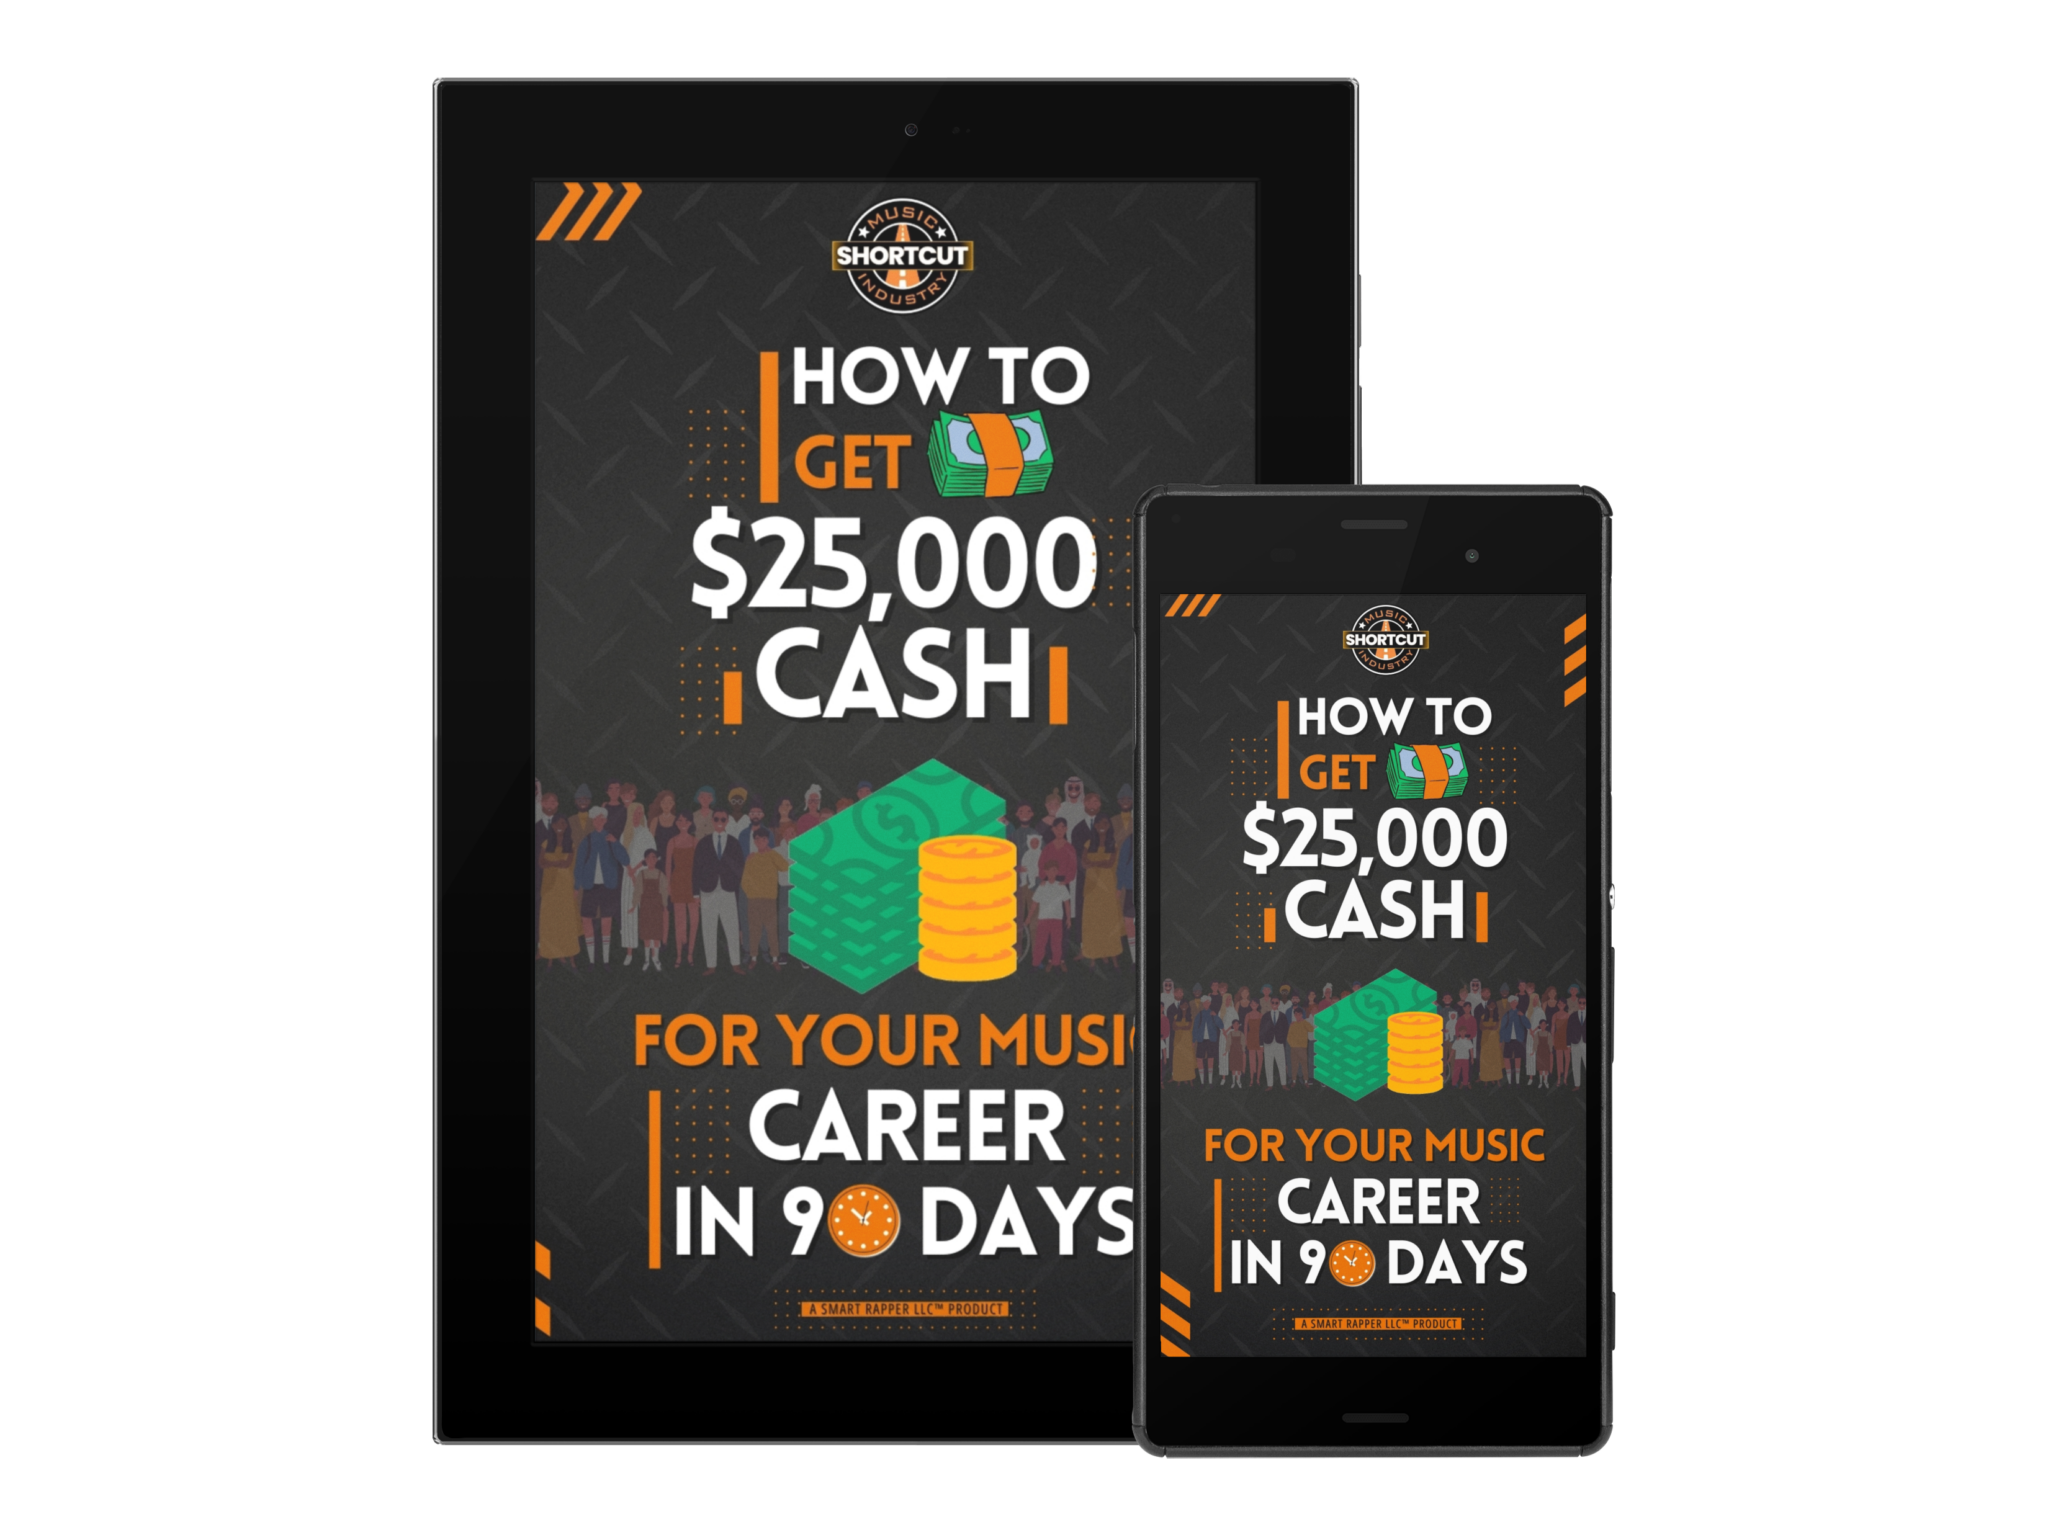 How To Get $25,000 Cash